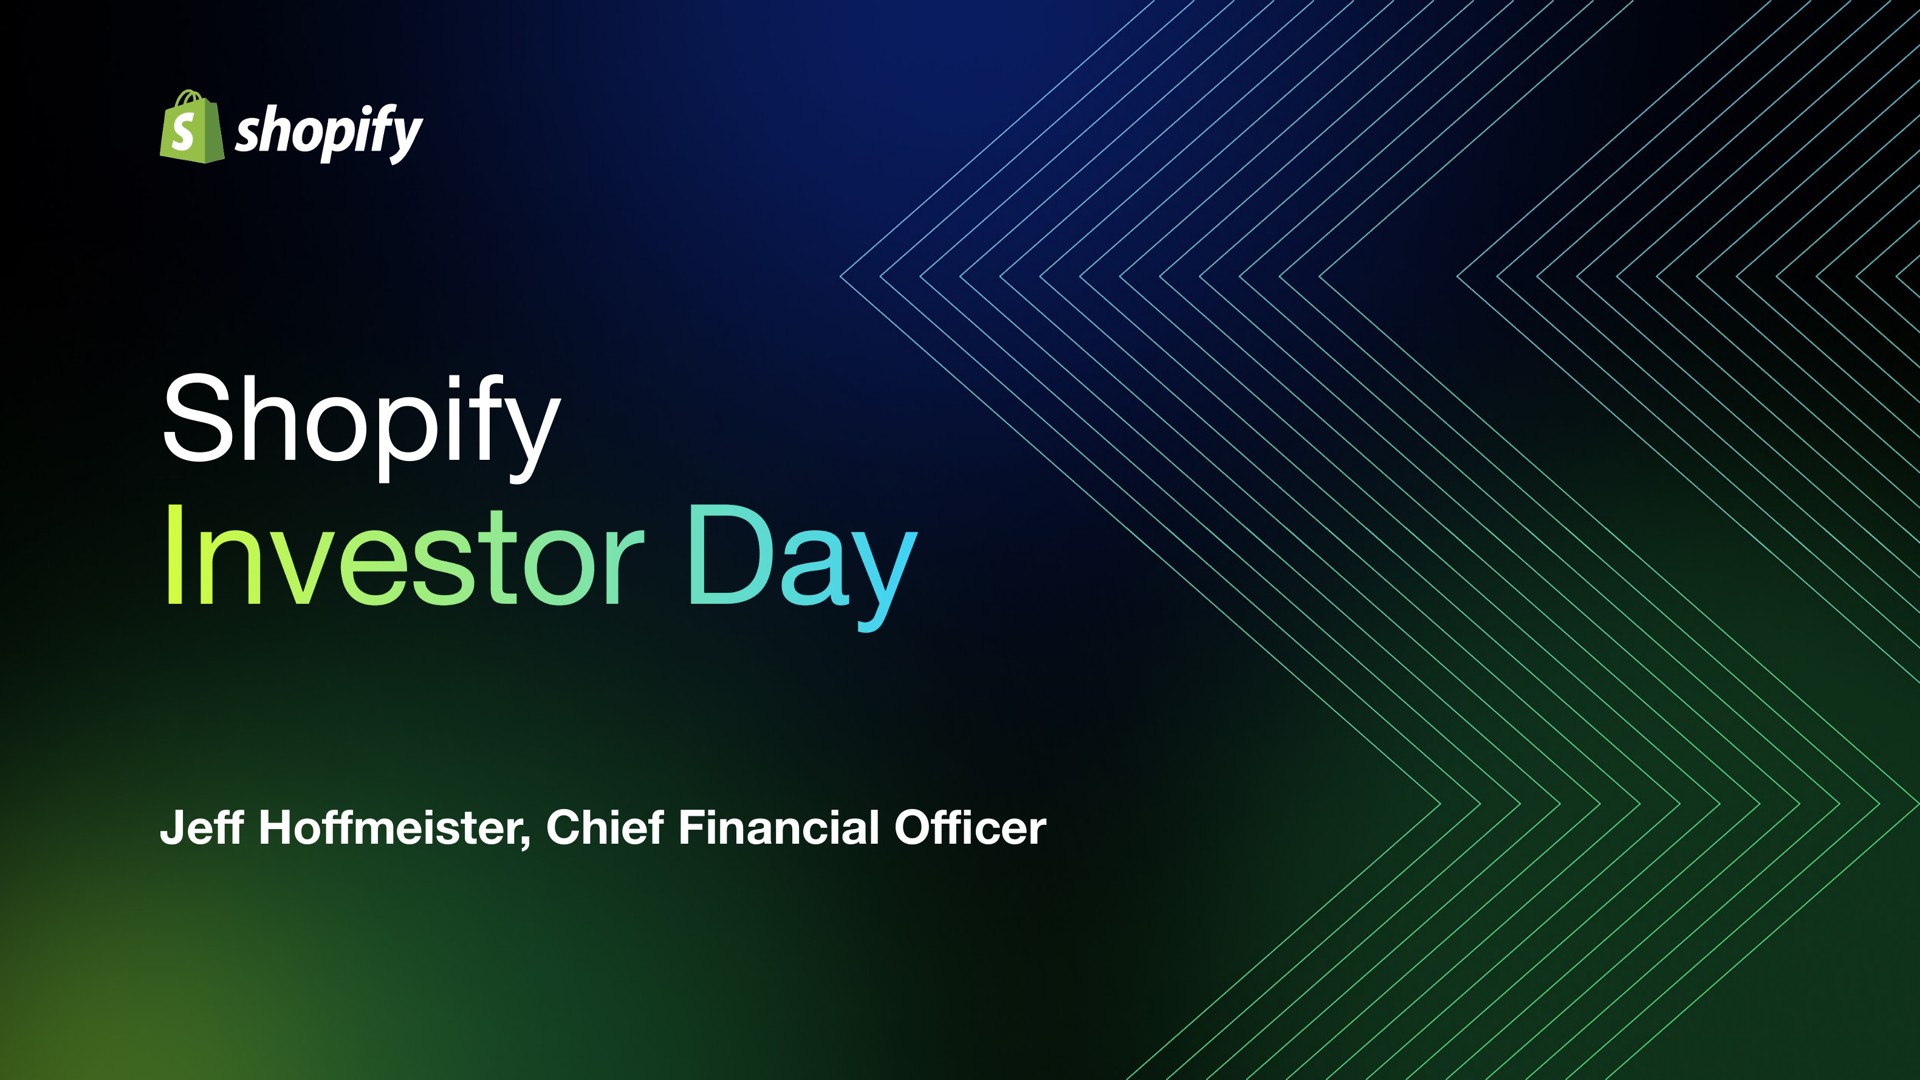 jeff chief financial officer | Shopify